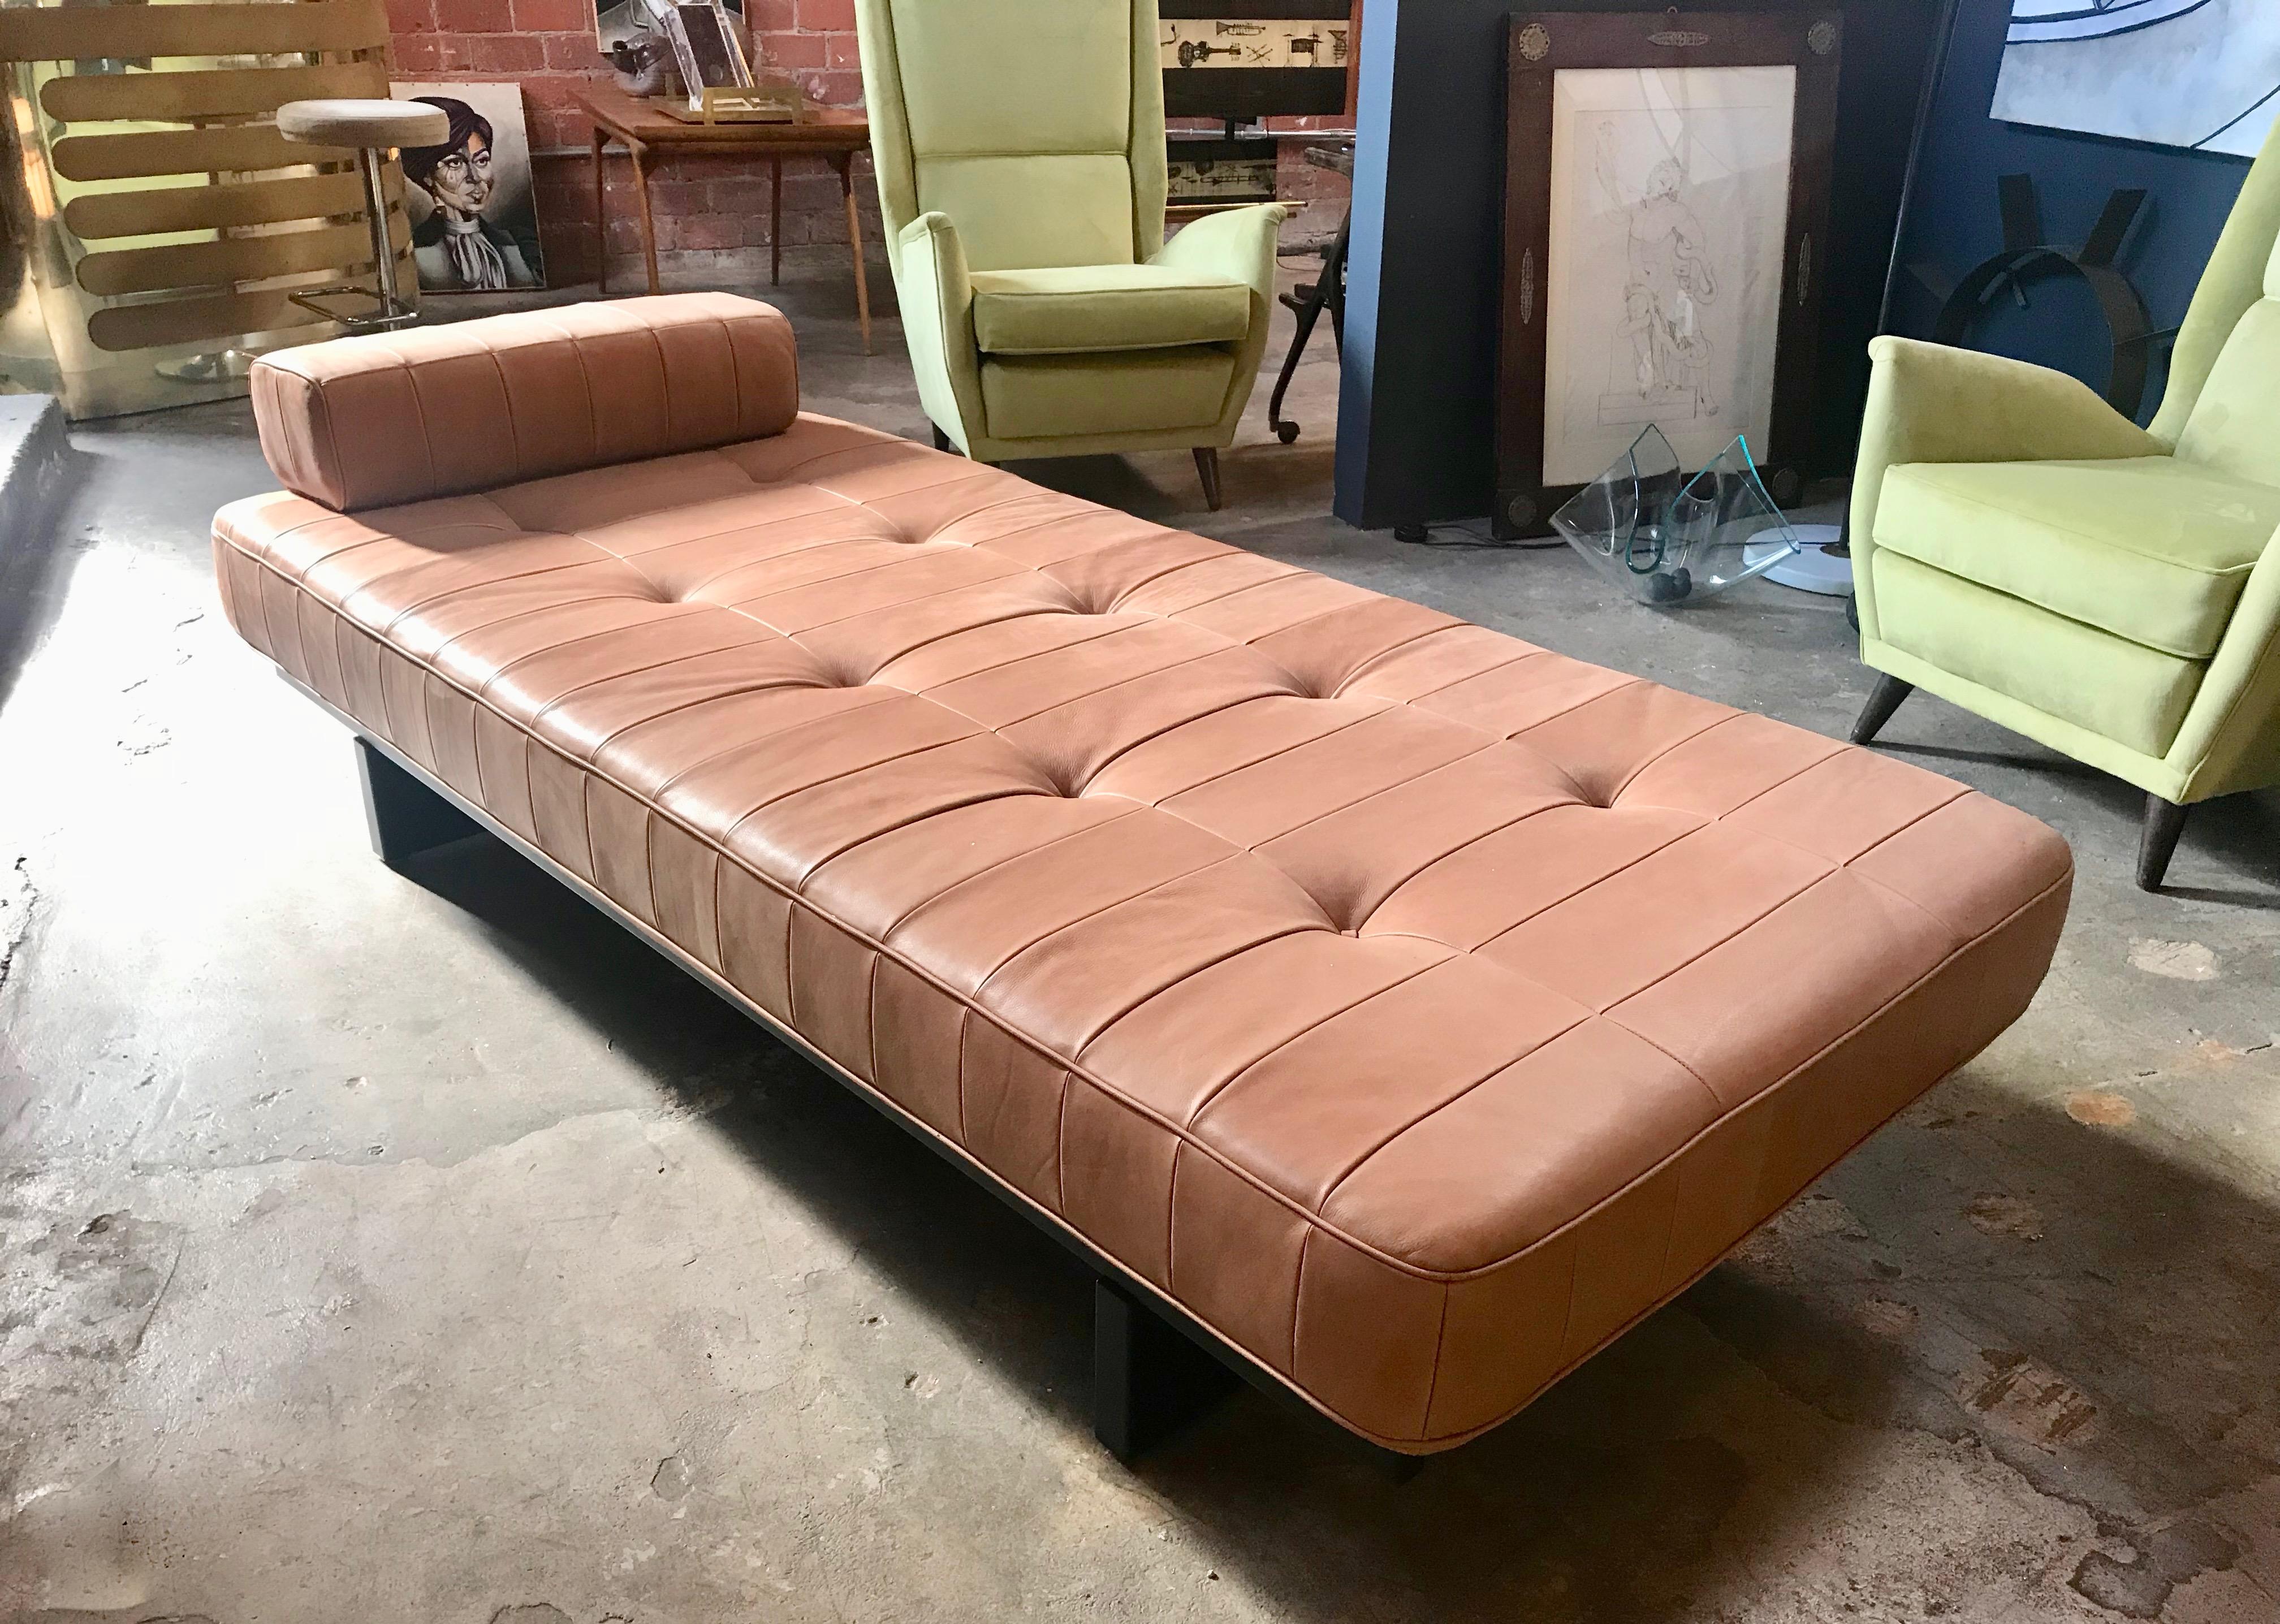 Rare original De Sede DS 80 daybed with one bolster patchwork cushion. Hand built in the 1960s to incredibly high standards by De Sede craftsman in Switzerland. The daybed stands on a black wooden frame and is extremely comfortable, upholstered in